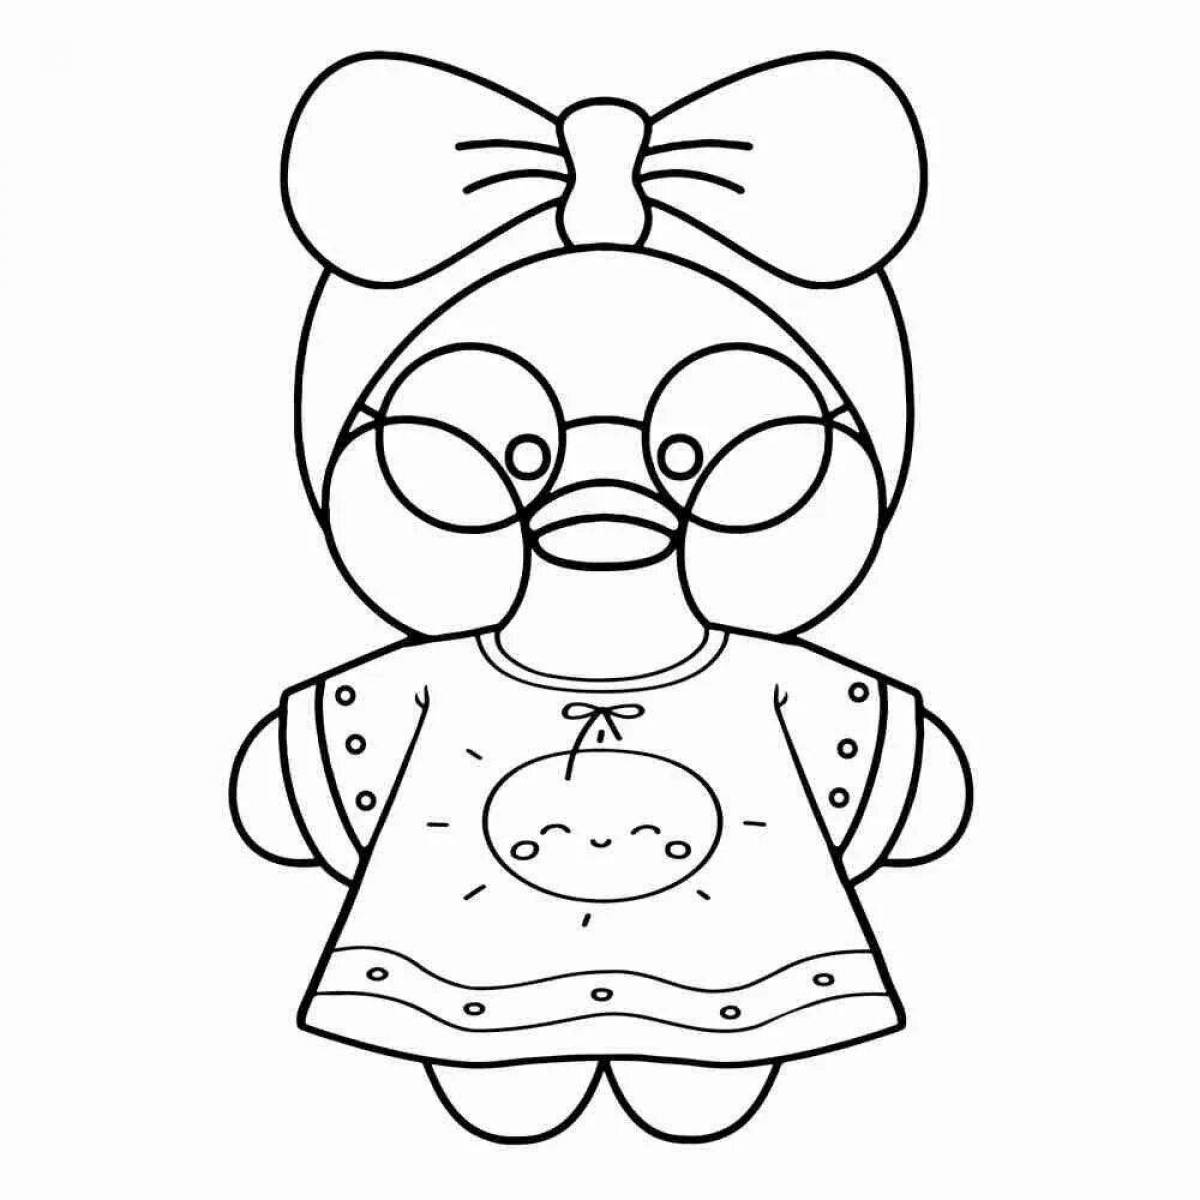 Exciting lalafanfan duck coloring page